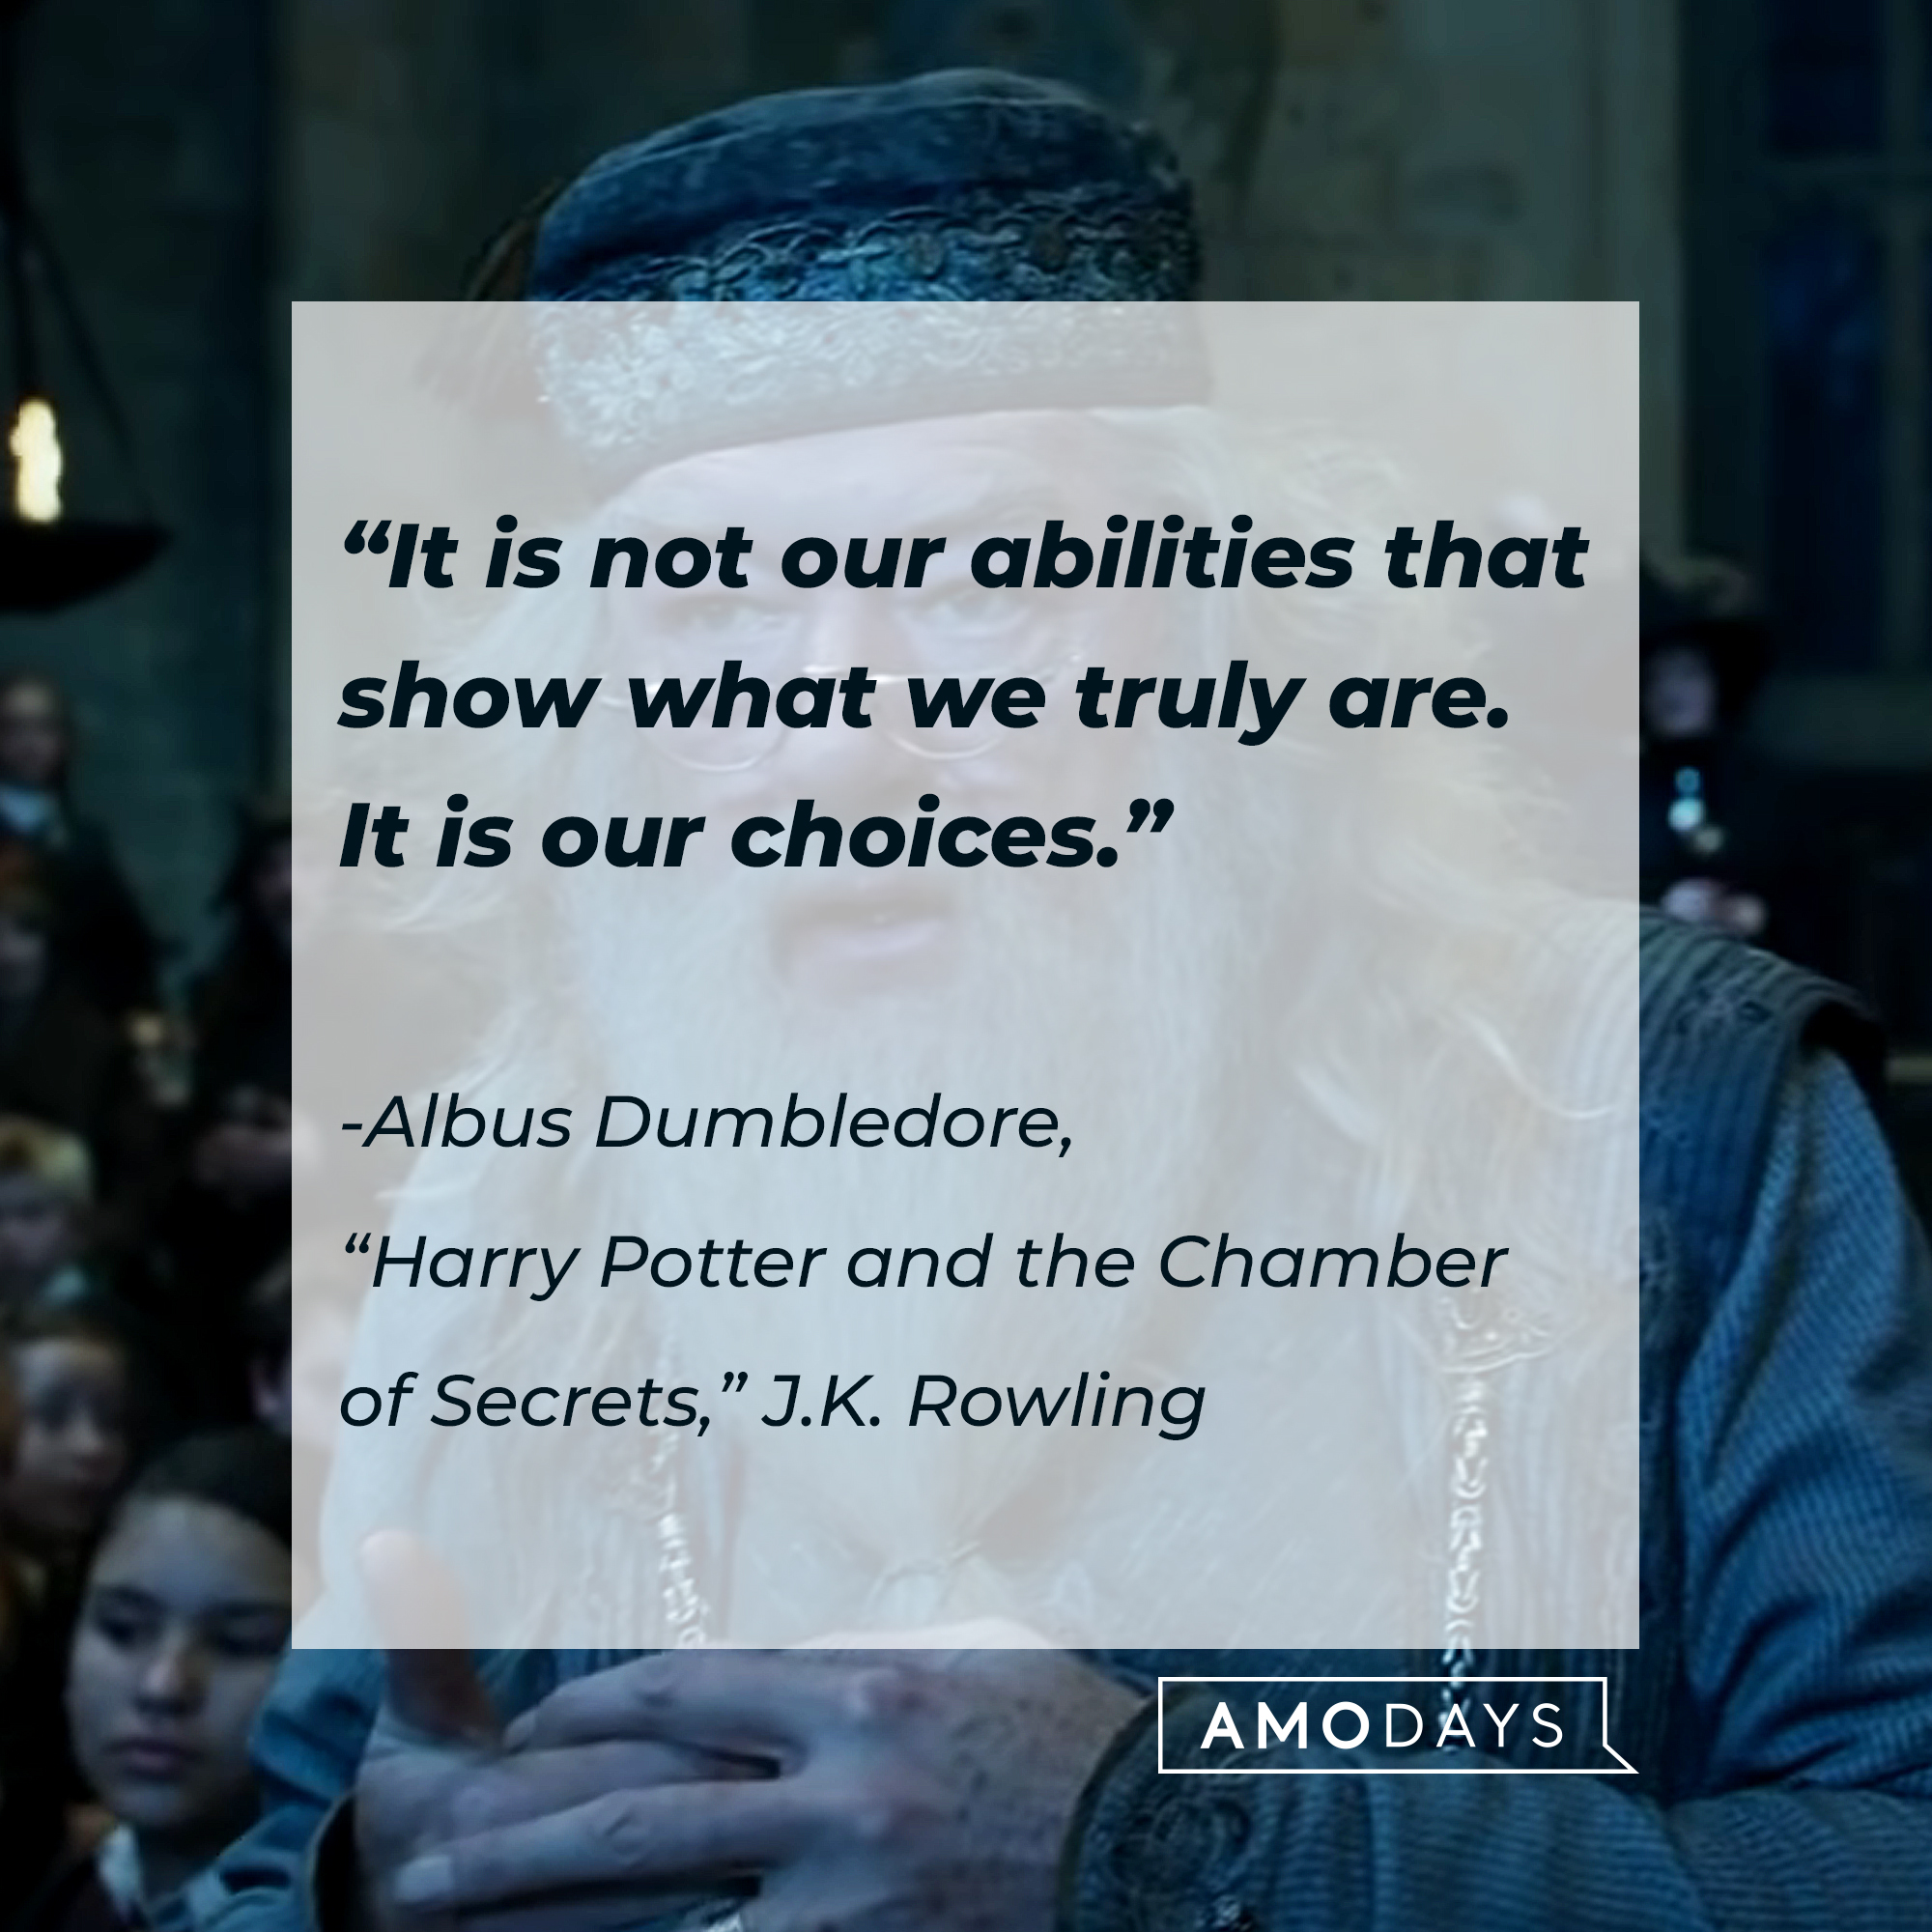 An image of Albus Dumbledore, with his quote: “It is not our abilities that show what we truly are. It is our choices.” | Source: Youtube.com/harrypotter